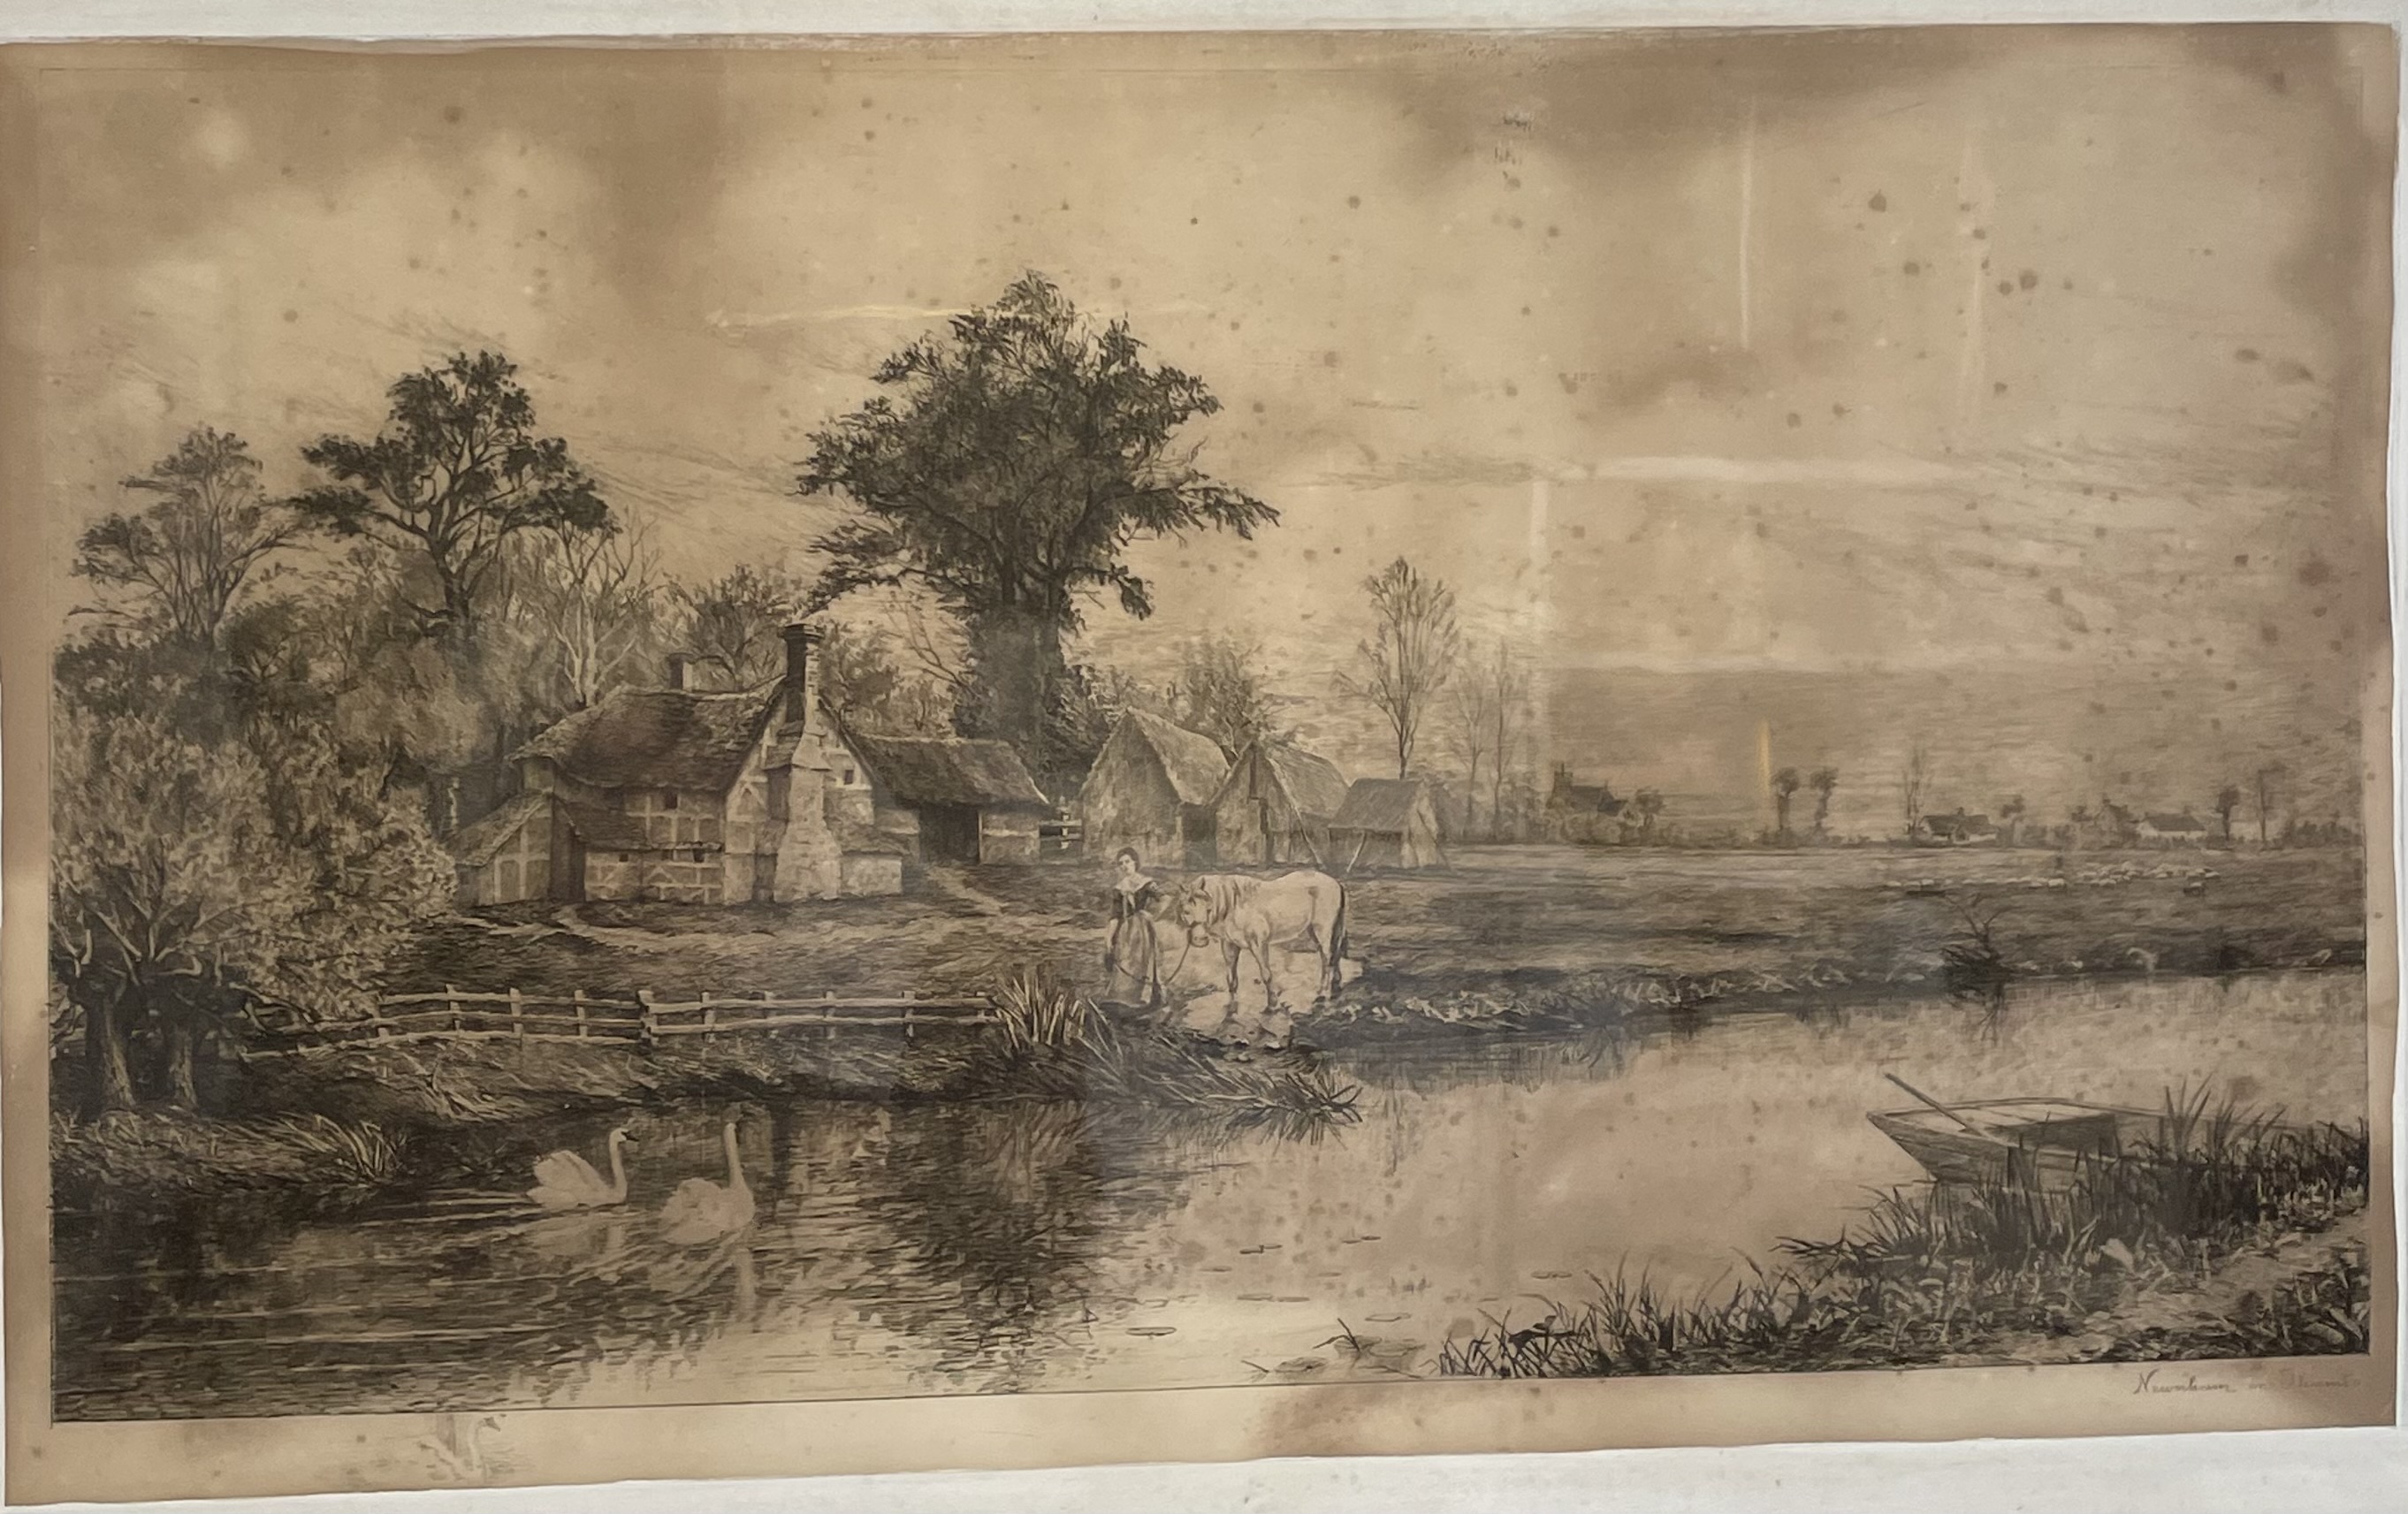 A Large 19th Century River Scene Etching, Titled Newnham-On-Sea - Image 2 of 2